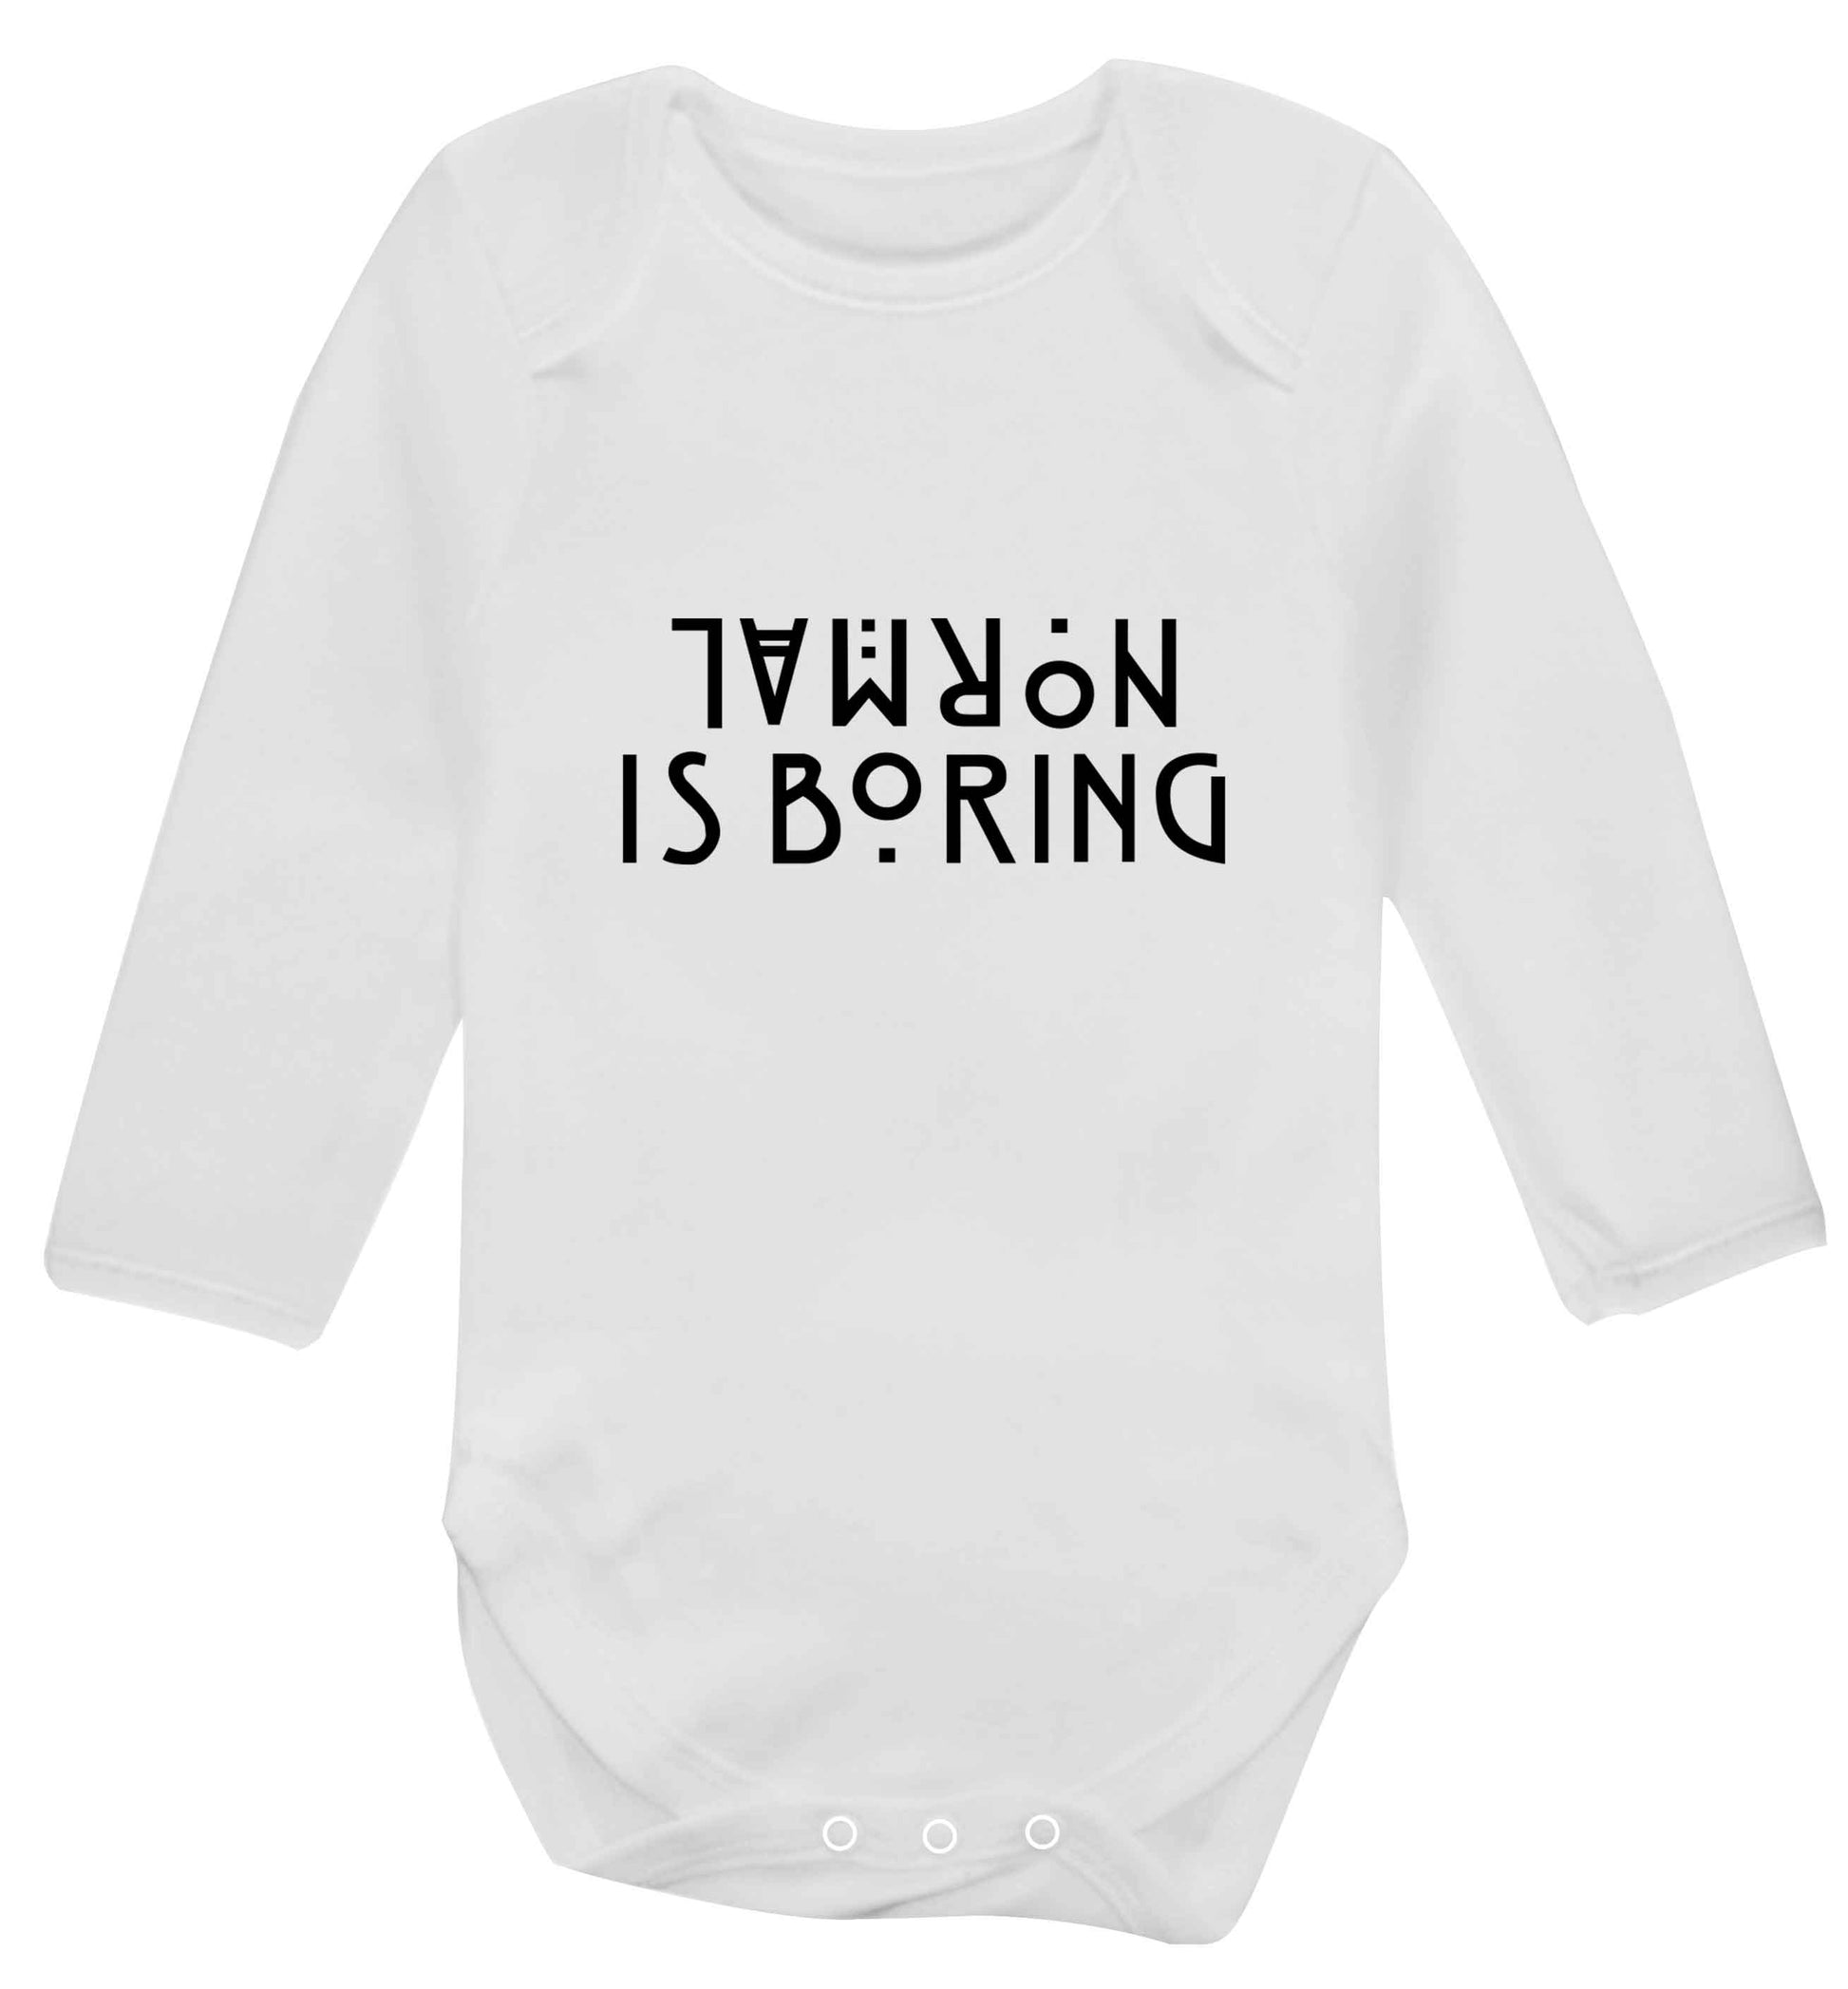 Normal is boring baby vest long sleeved white 6-12 months